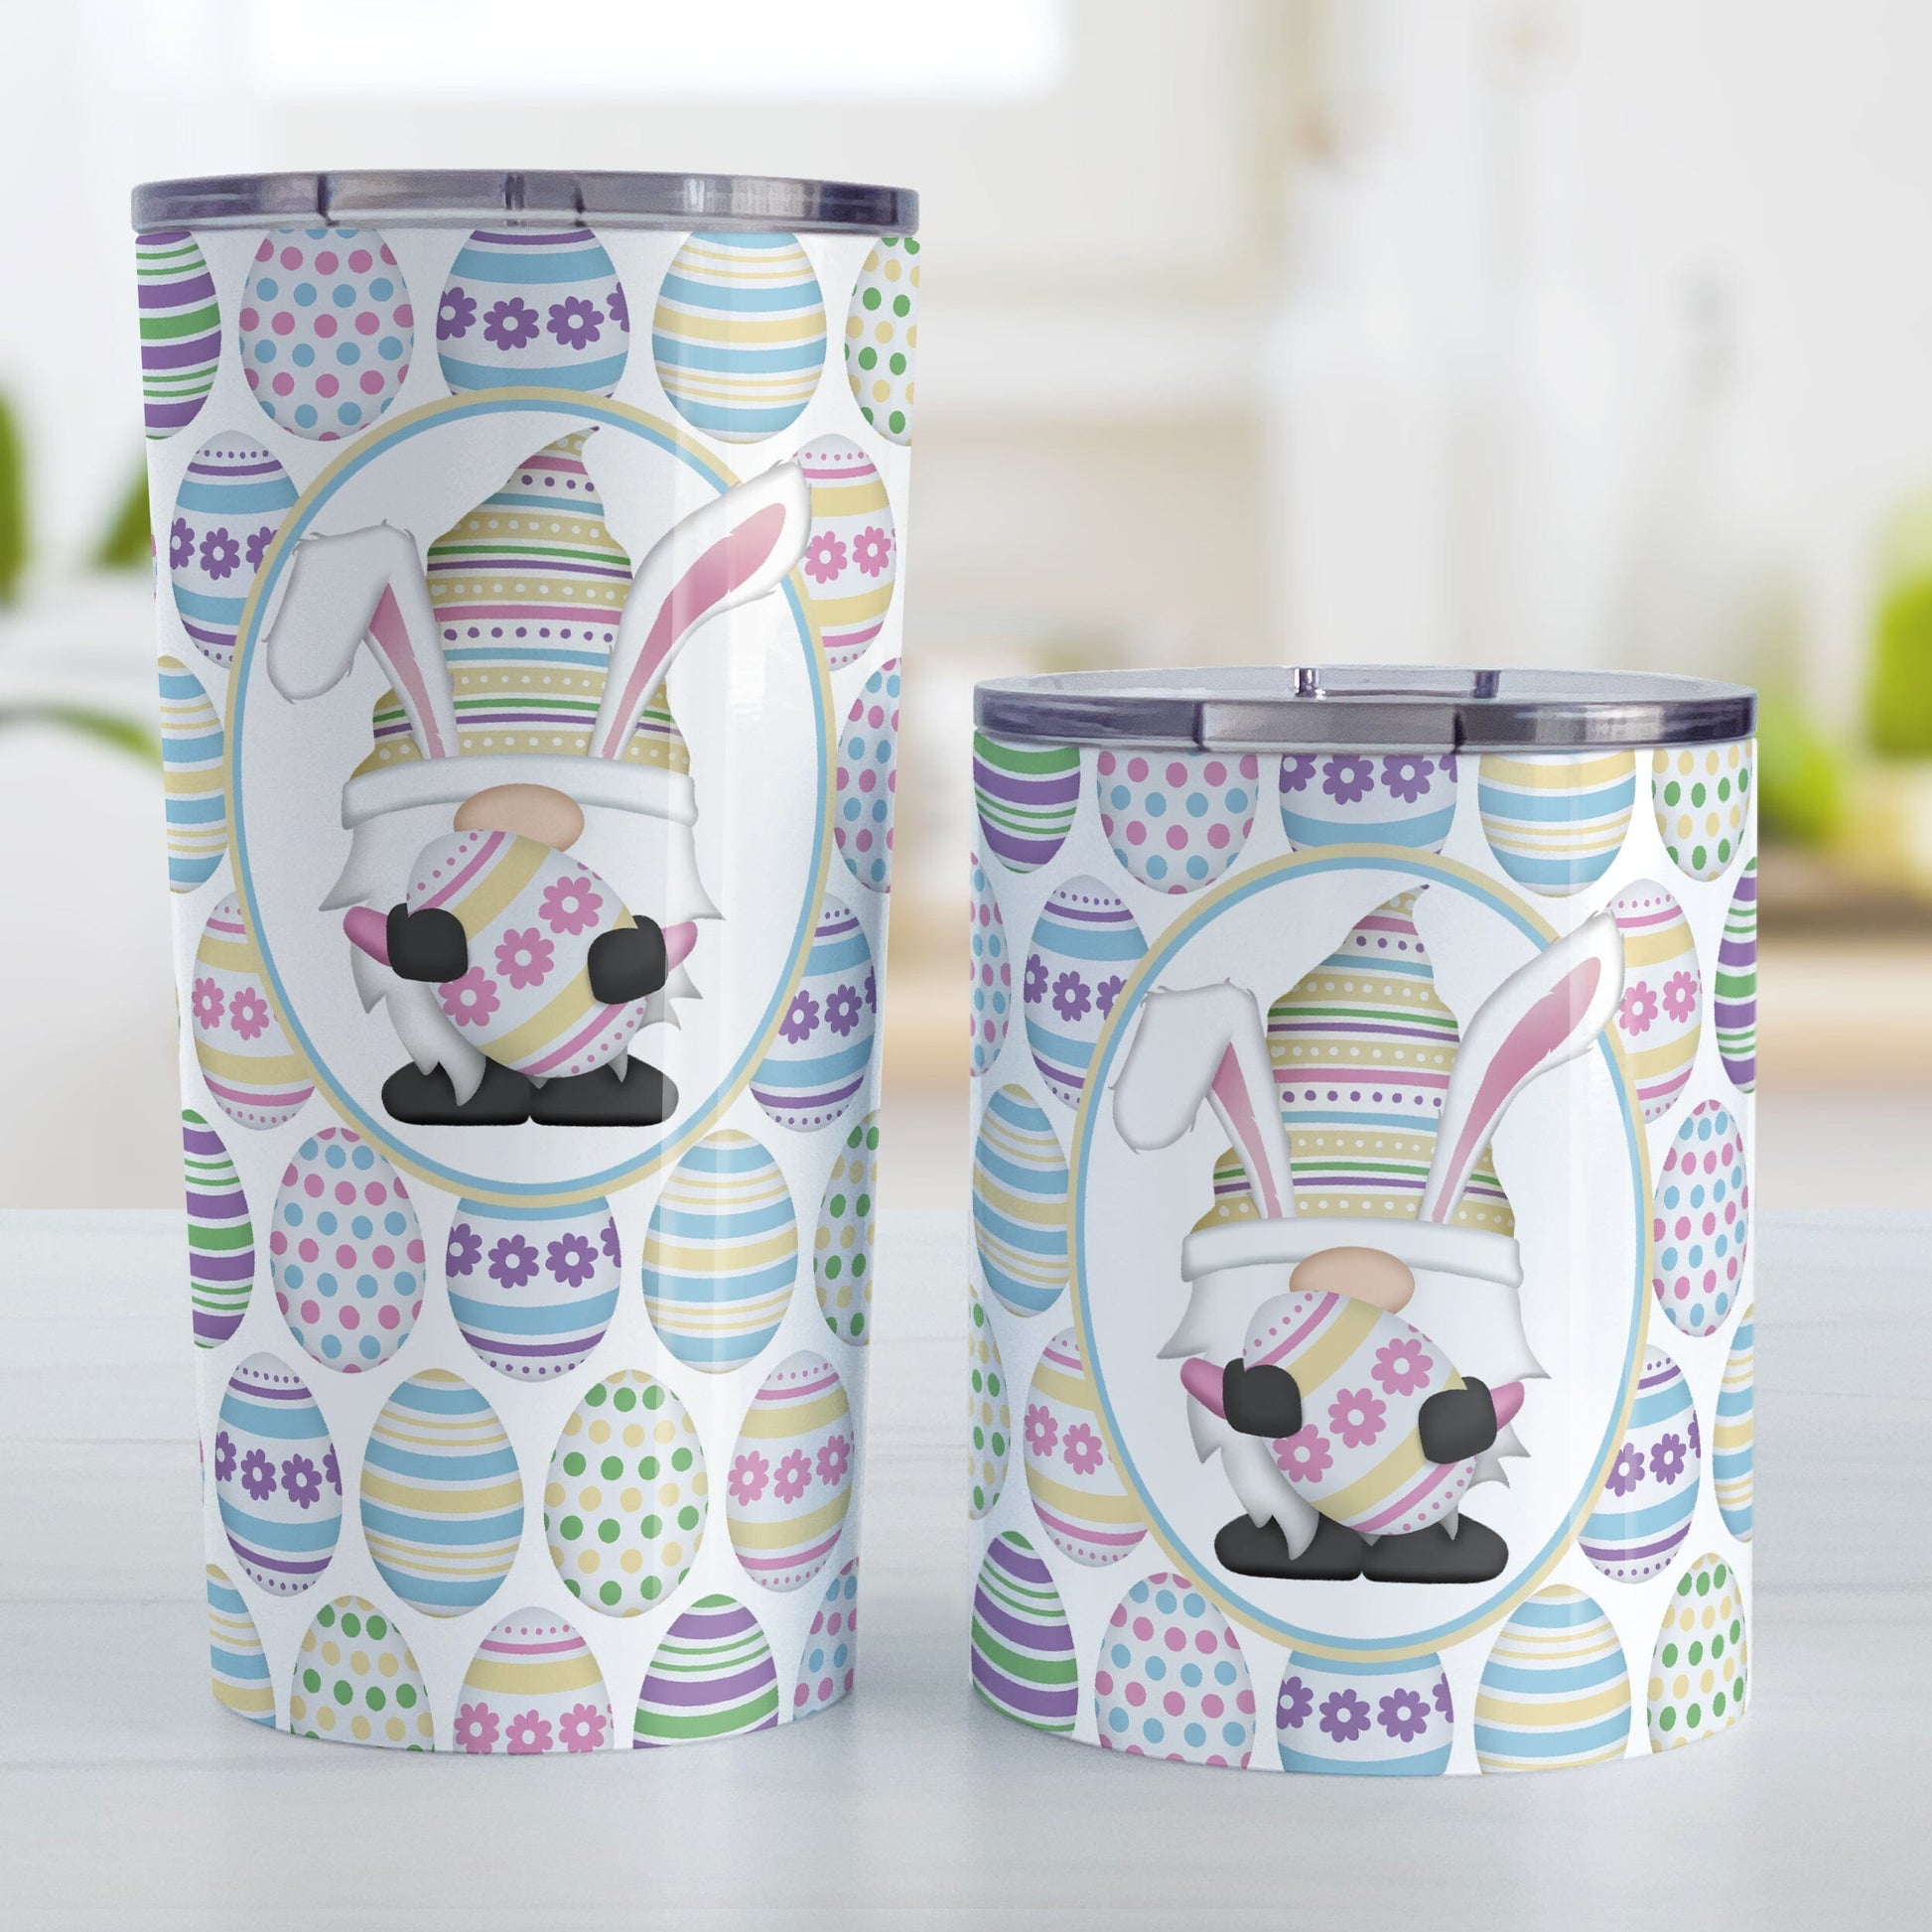 Easter Gnome Eggs Tumbler Cup (20oz or 10oz) at Amy's Coffee Mugs. Stainless steel tumbler cups designed with an illustration of an adorable gnome with bunny ears, holding a large pink and yellow Easter egg, in a white oval over a decorated Easter eggs pattern that wraps around the cups. Photo shows both sized cups next to each other on a table. 